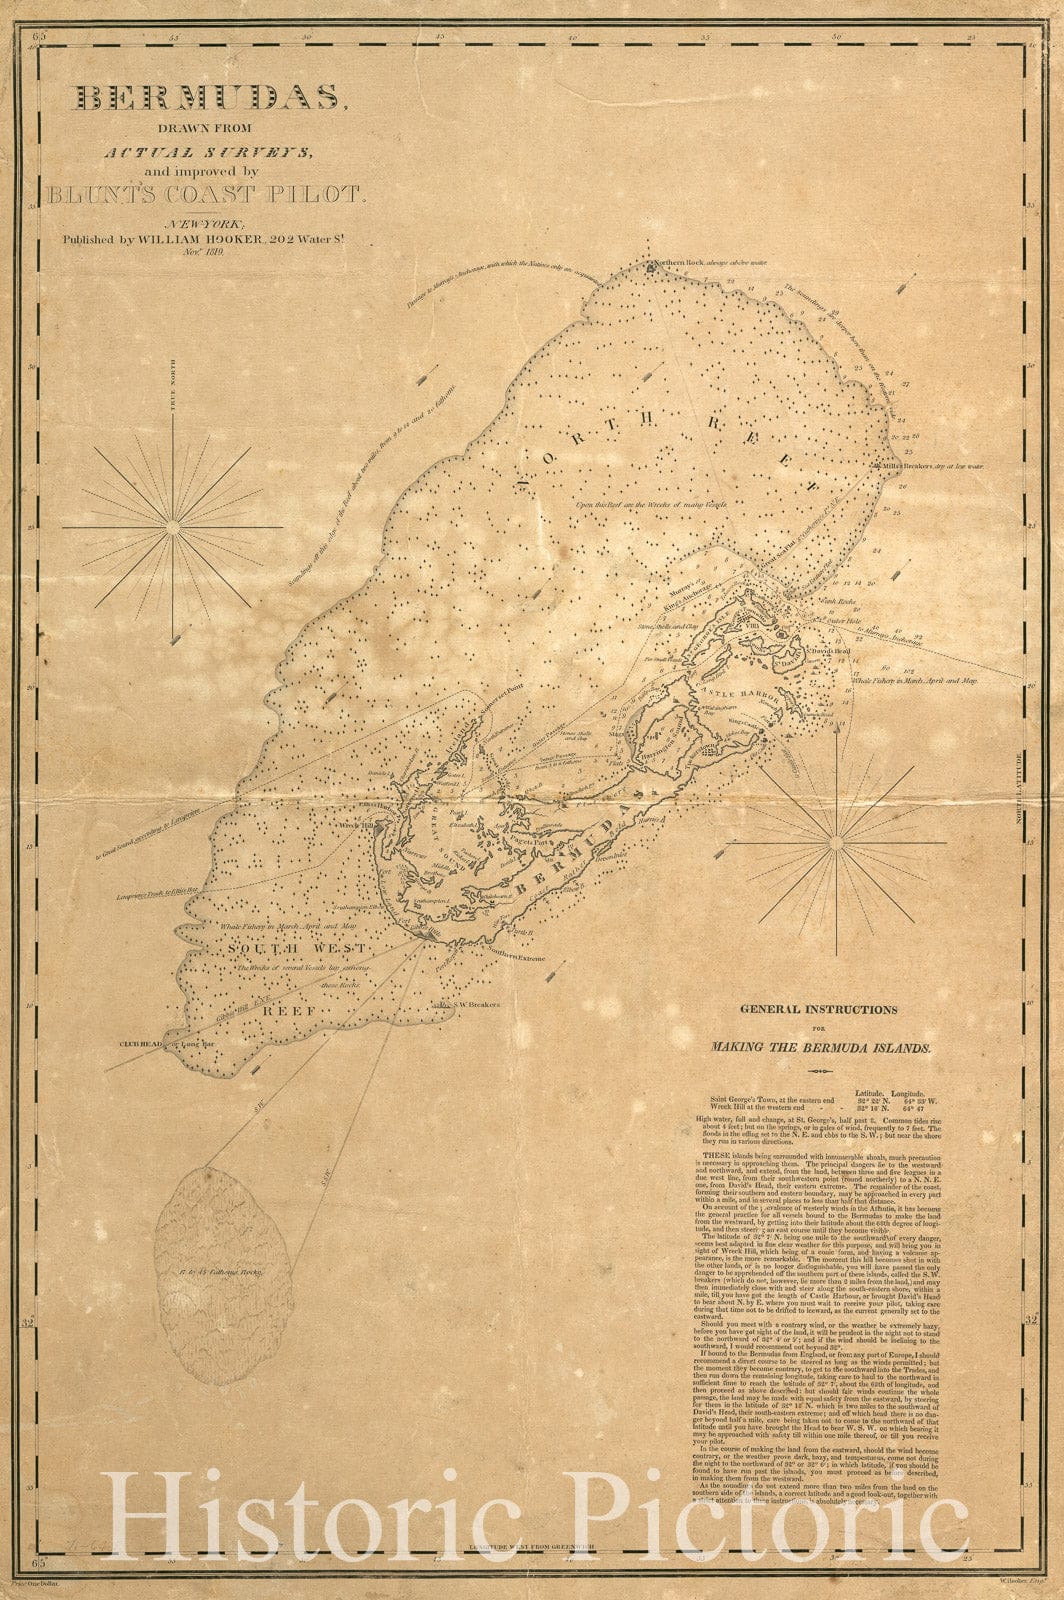 Historic 1819 Map - Bermudas, Drawn from Actual surveys, and Improved by Blunt's Coast Pilot.